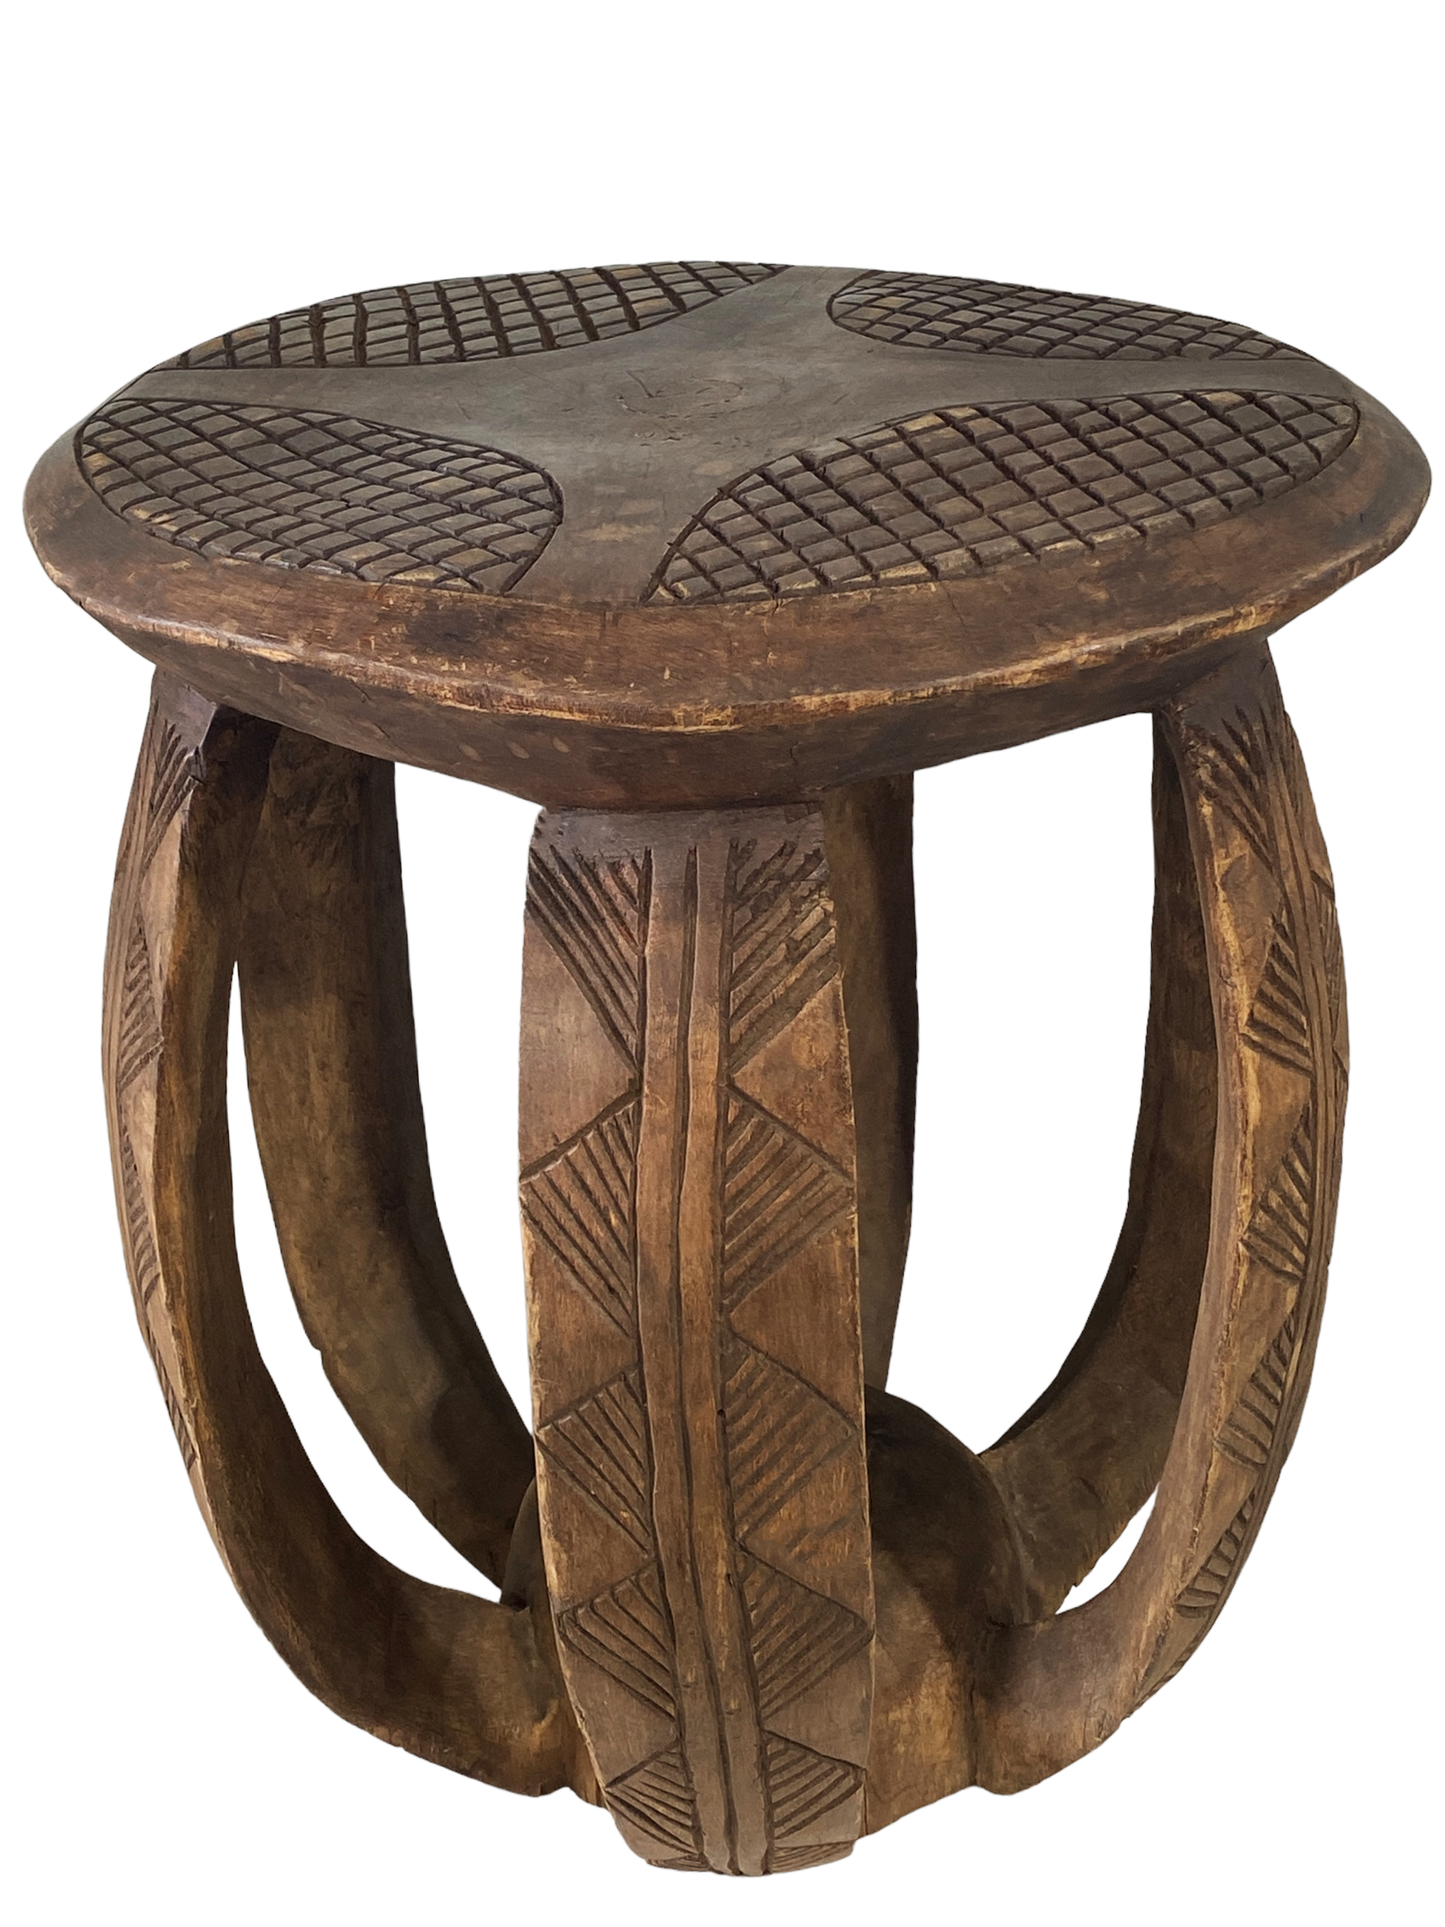 #5186 LG African  Baga Stool /Table  Guinea-Bissau  20.25" H by 17"D